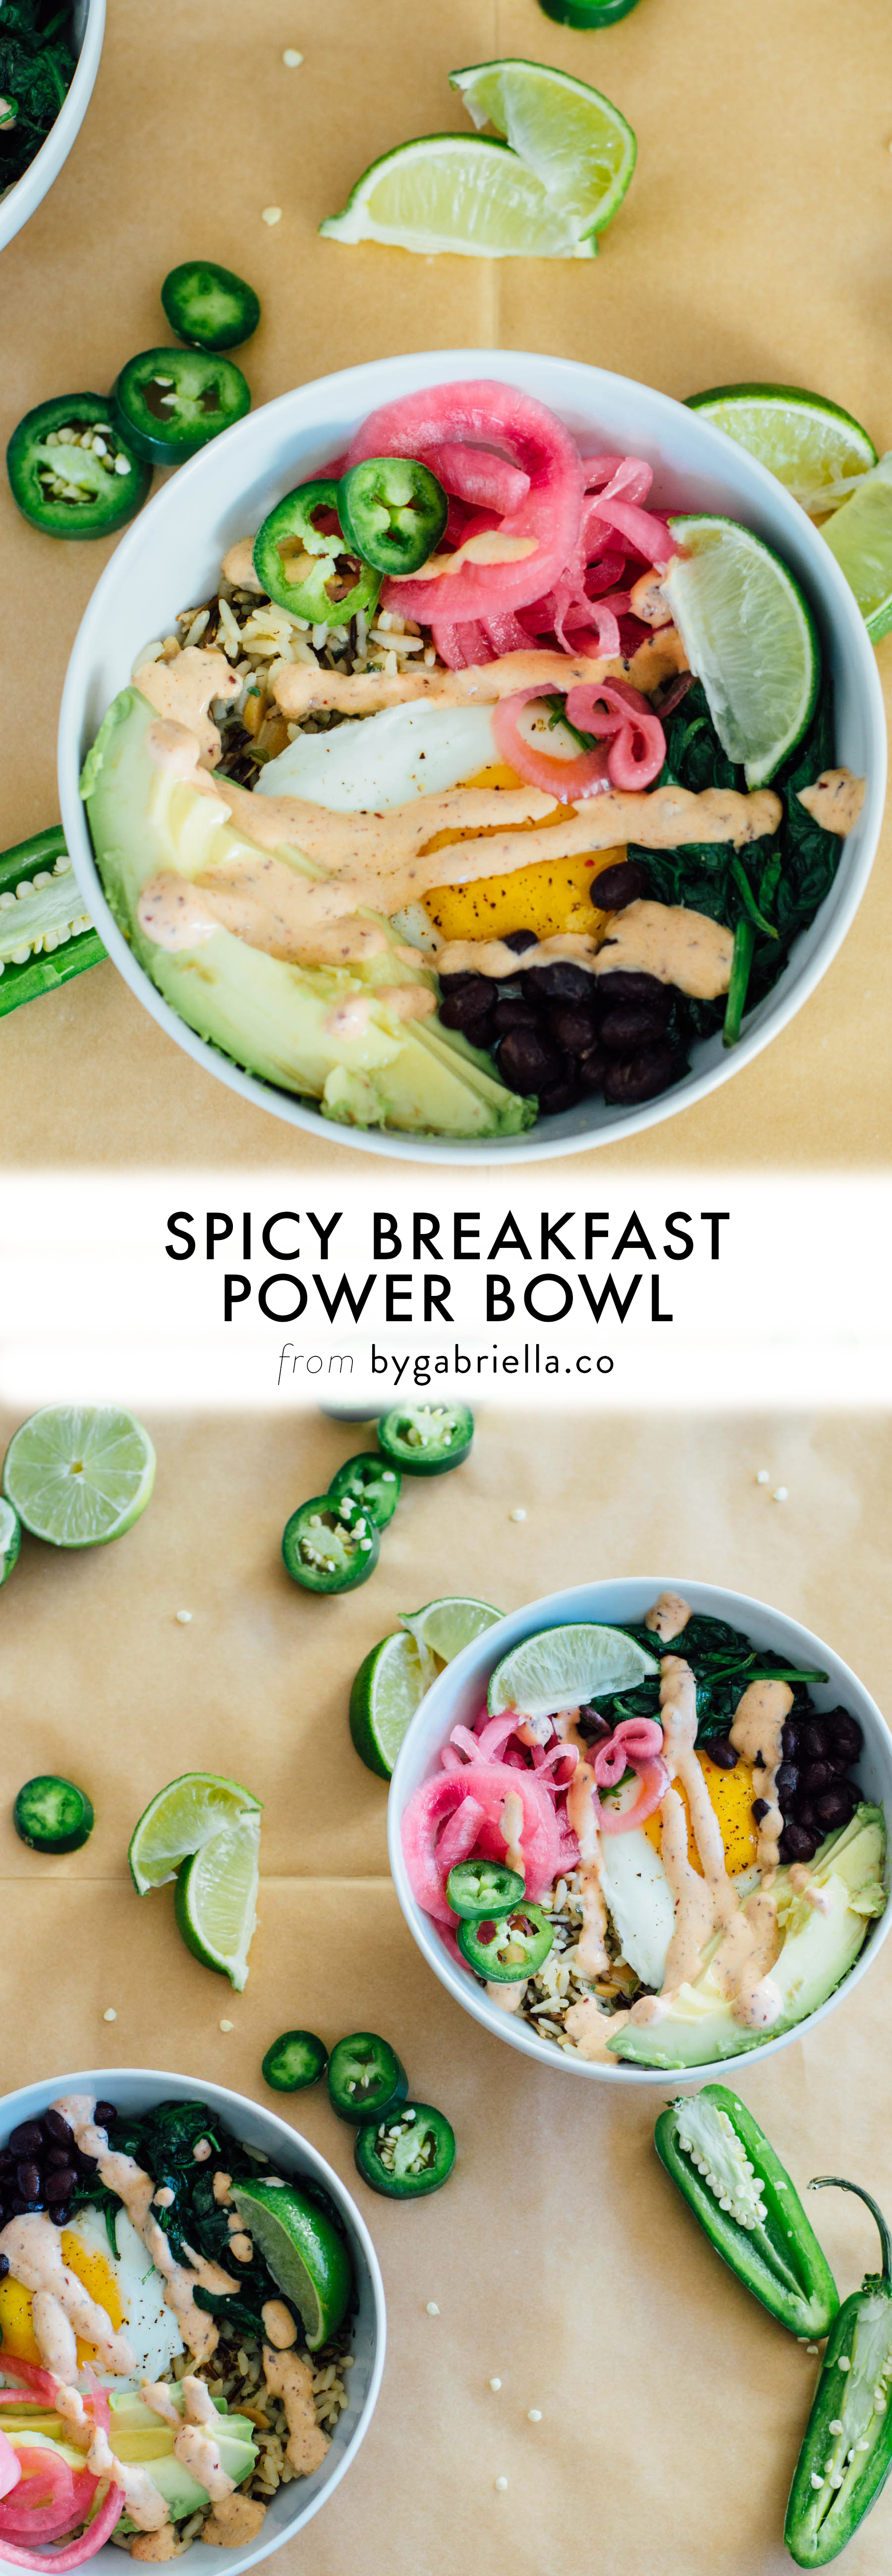 Easy breakfast recipe! A Spicy Breakfast Power Bowl with pickled red onions, avocado, and more. | Get the full recipe on bygabriella.co #riceonthego #ad